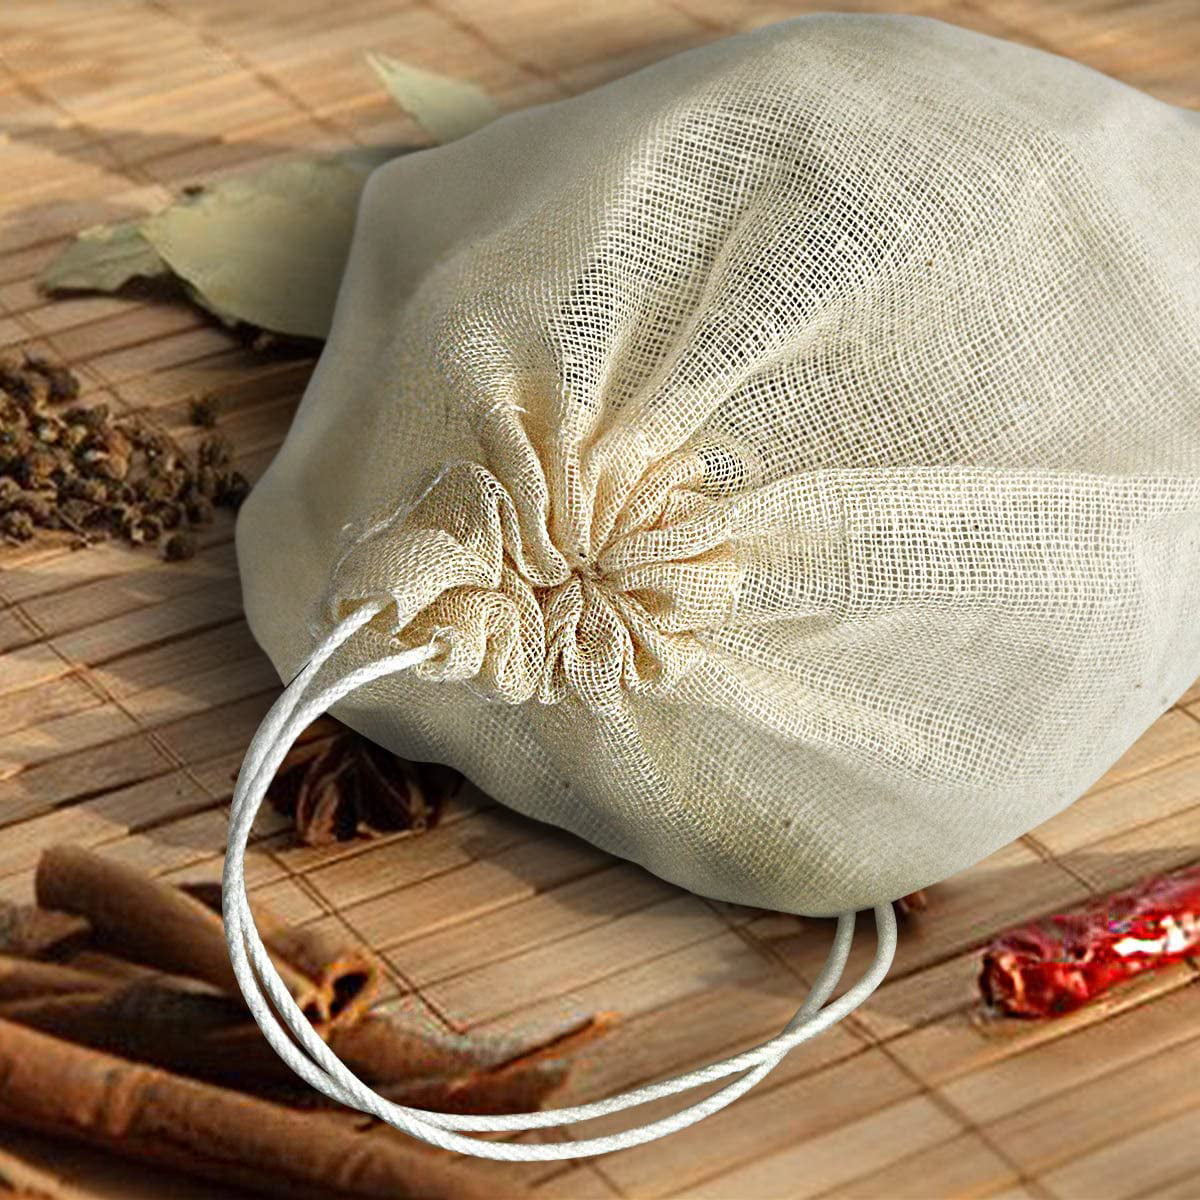 Details about   Norpro Reusable Brew Bags 4 pack Great for Tea Spices Broth Gravy Stew & Soup 